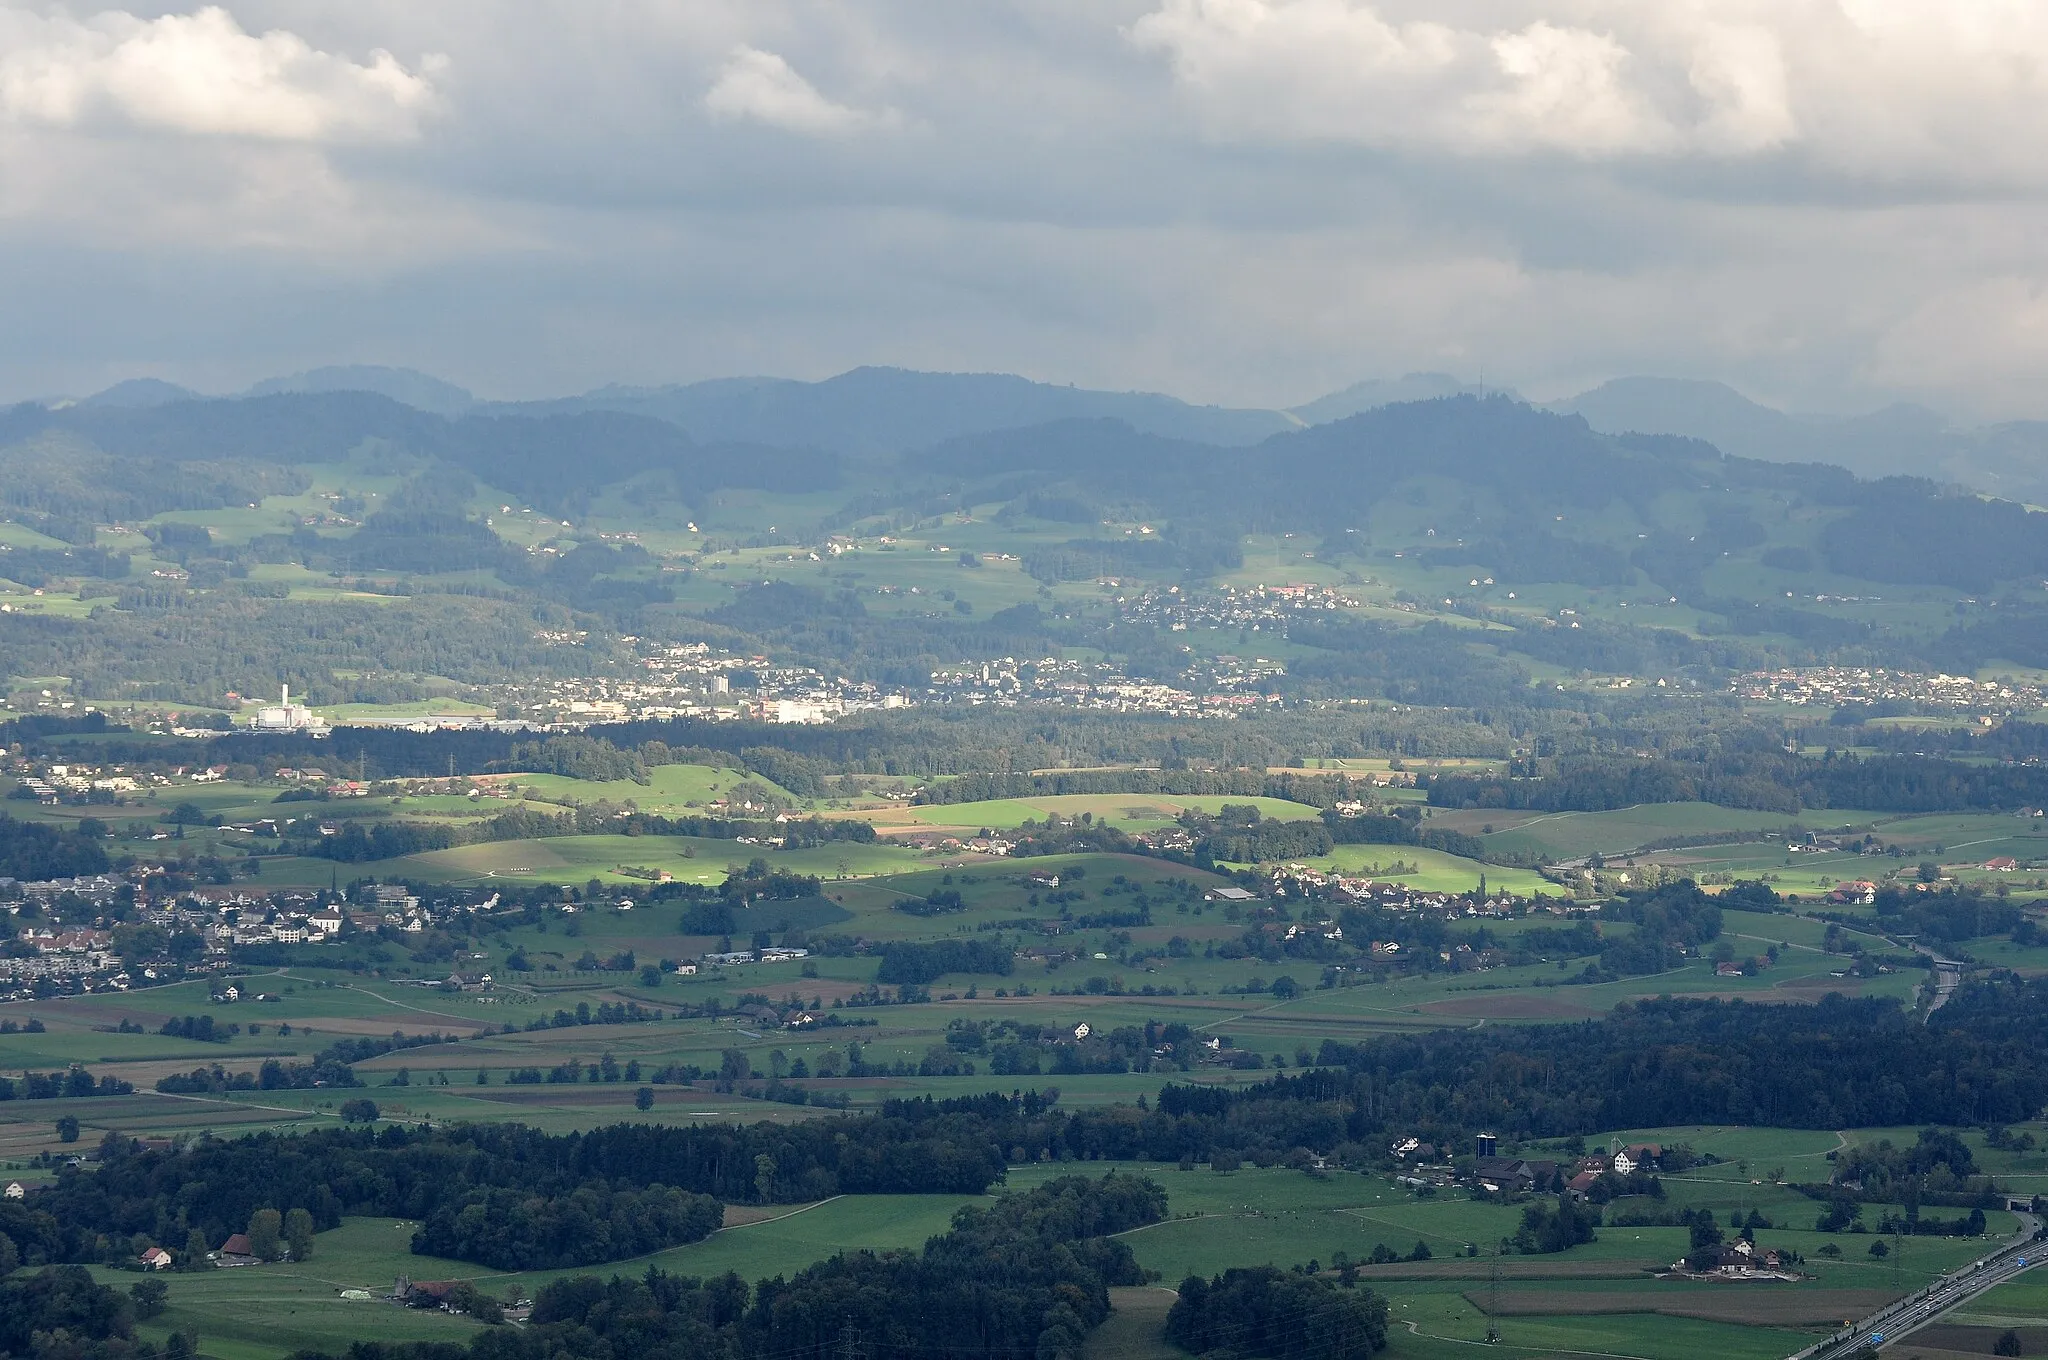 Photo showing: Hinwil (Switzerland) as seen from Pfannenstiel Aussichtsturm, Bachtel mountain and Dürnten (to the right) in background.